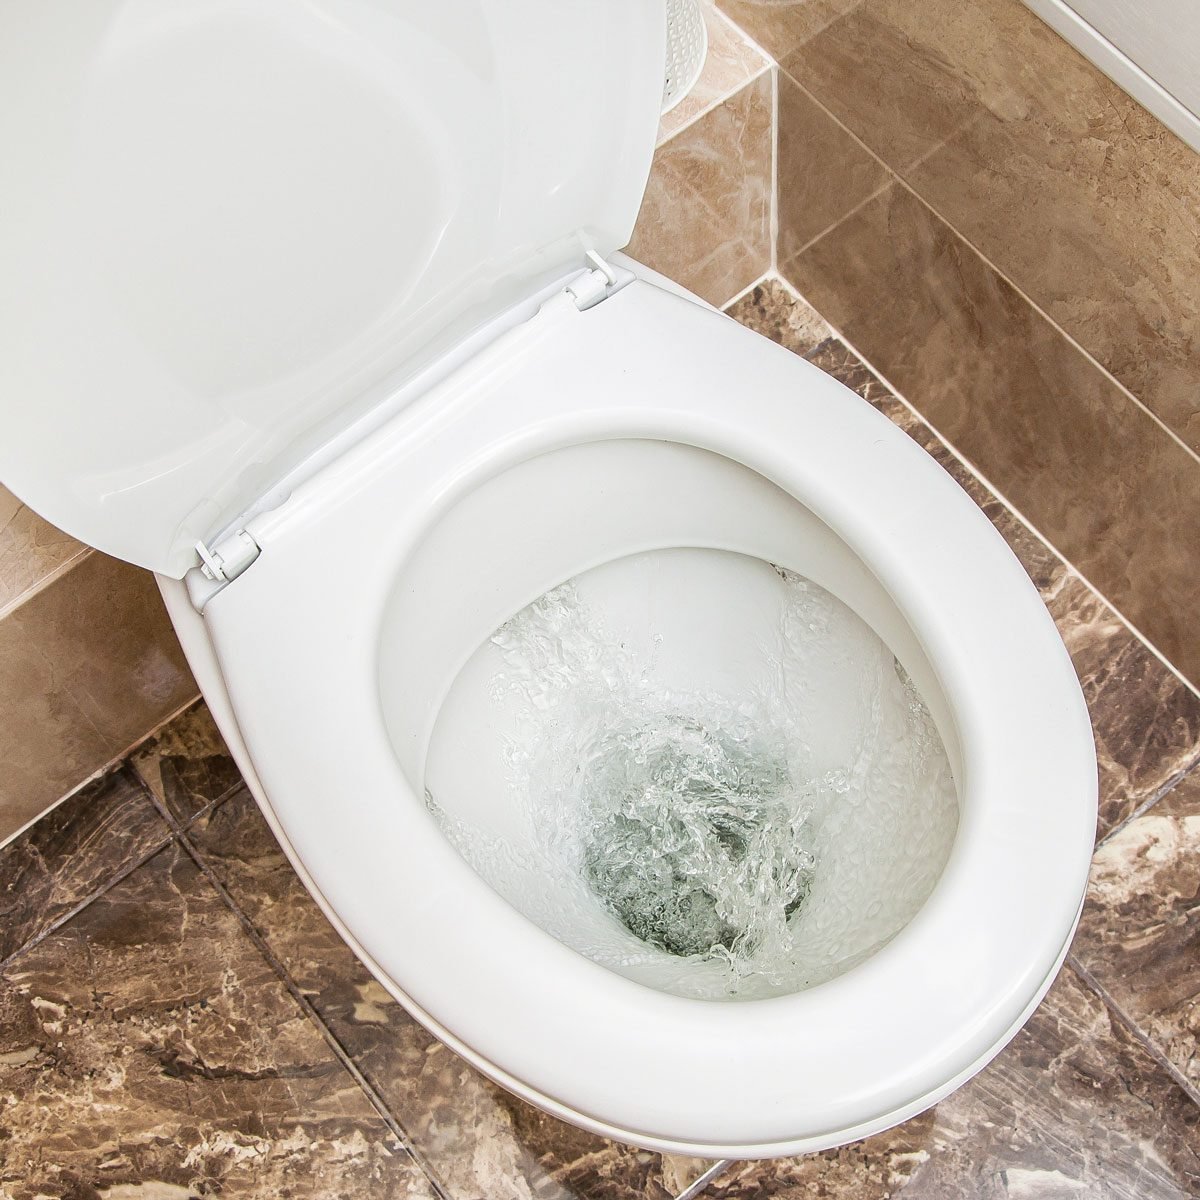 10 Reasons Why Your Toilet Won't Flush